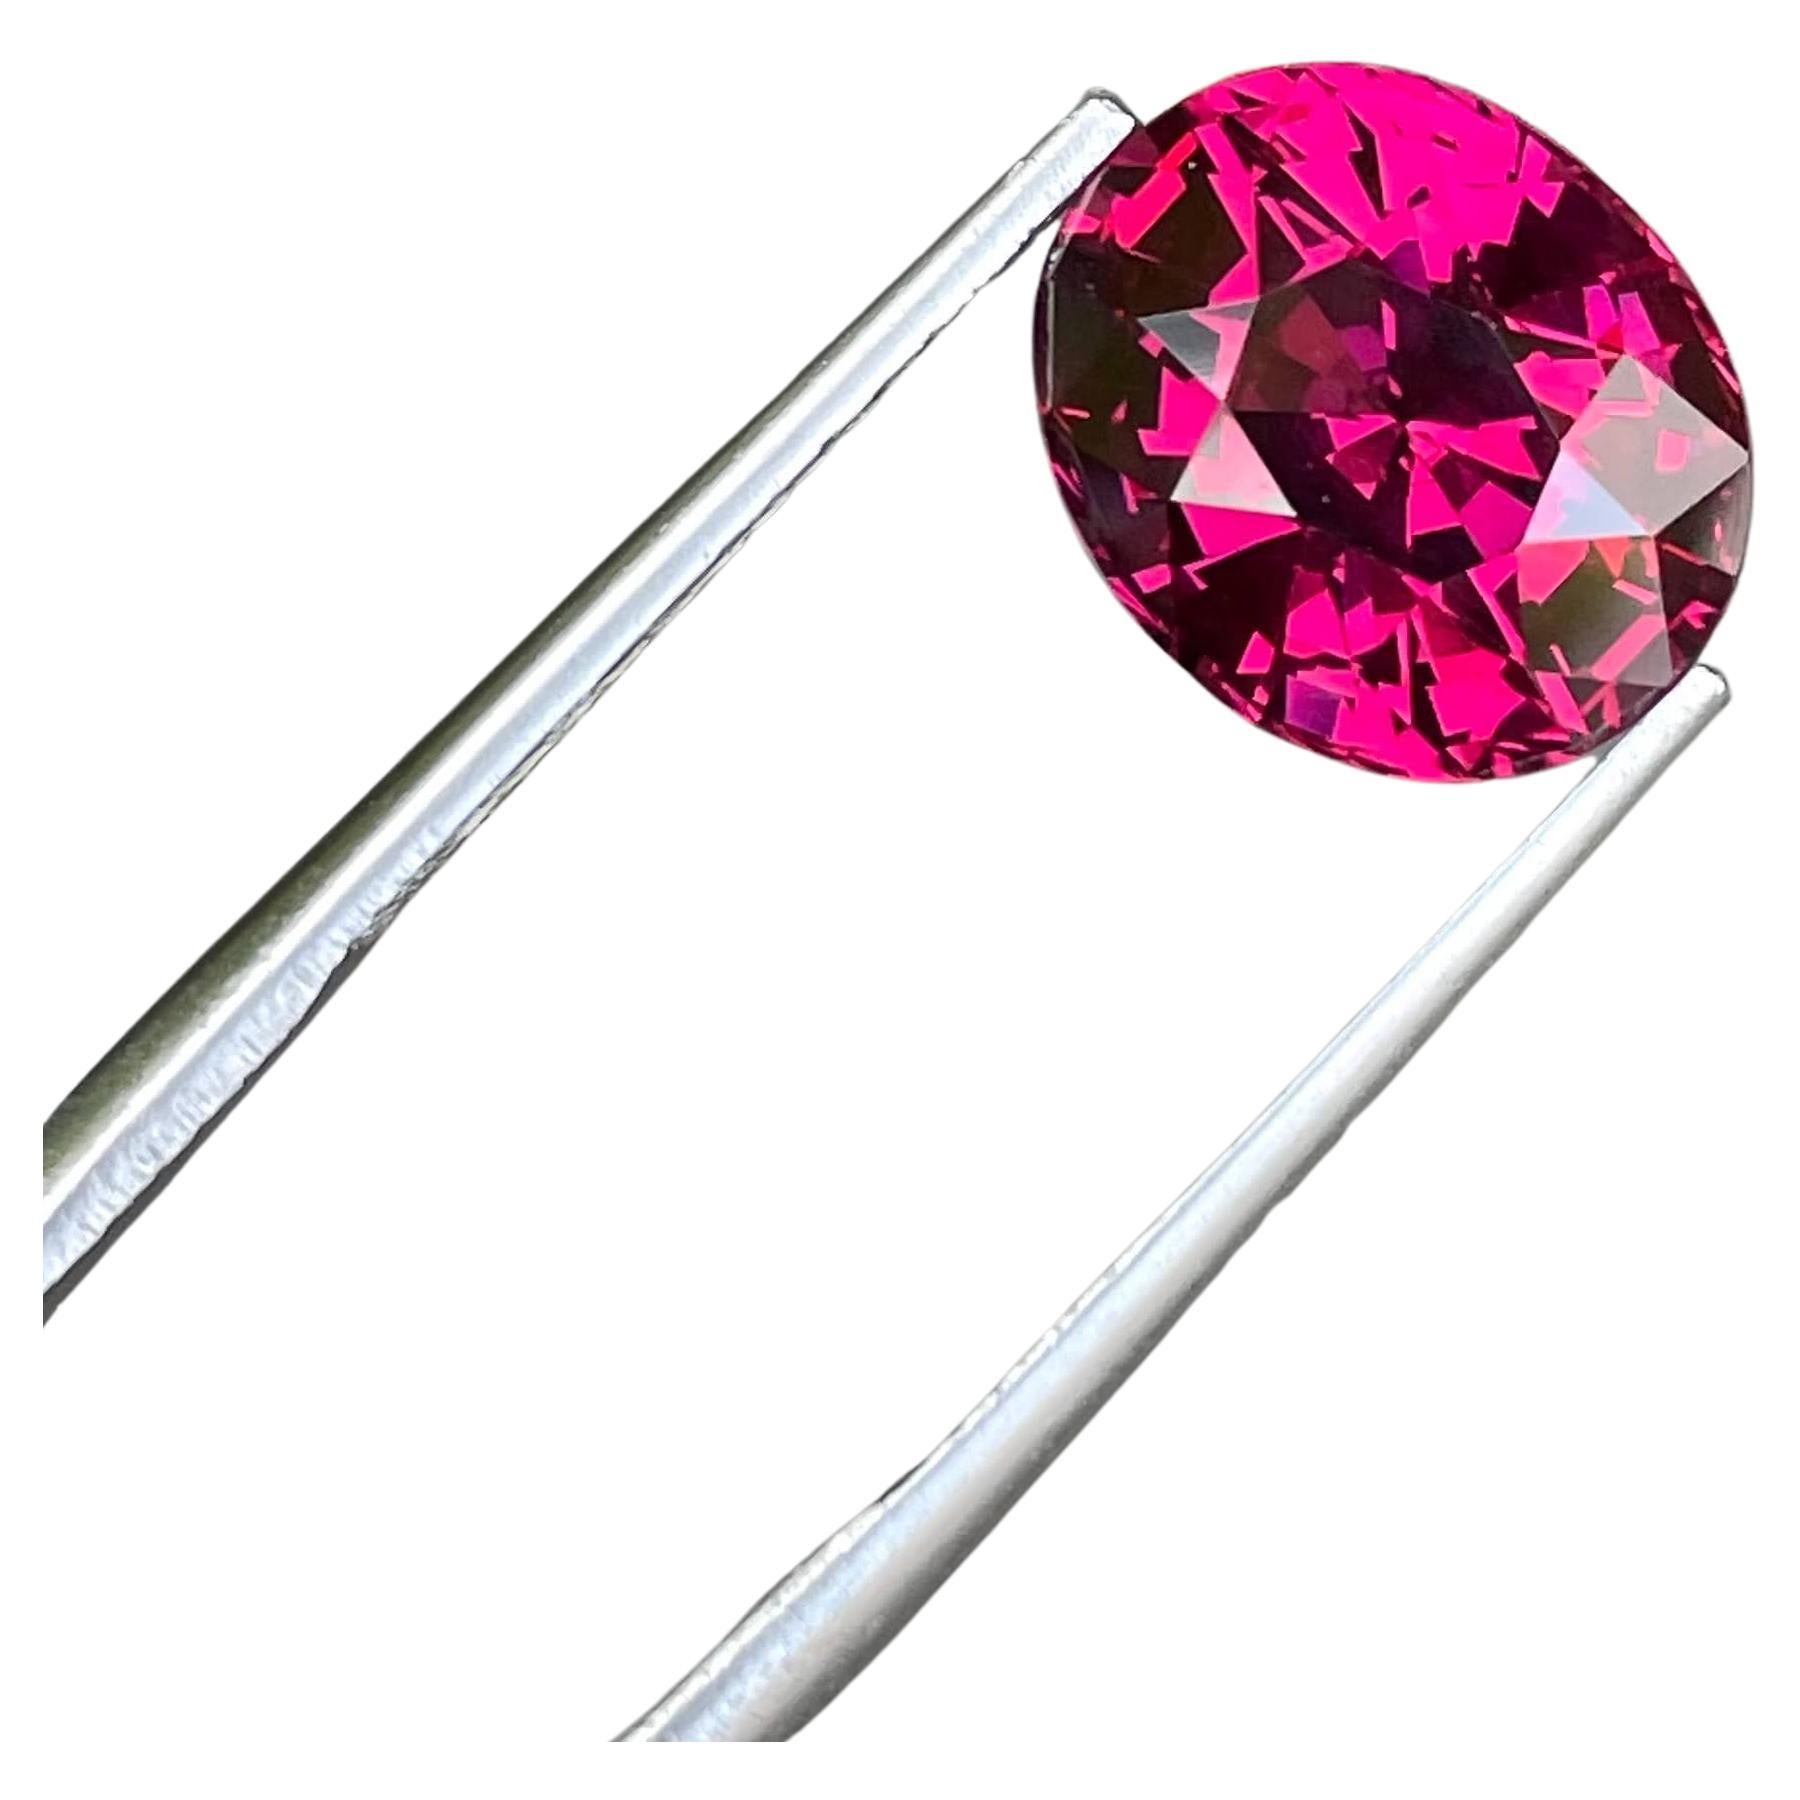 Weight 6.27 carats 
Dimensions 11.70x9.83x7.39 mm
Treatment none 
Origin Madagascar 
Clarity eye clean 
Shape oval 
Cut fancy oval




This exquisite gemstone, a 6.27 carat pinkish-red Garnet, boasts a fancy oval cut that accentuates its natural